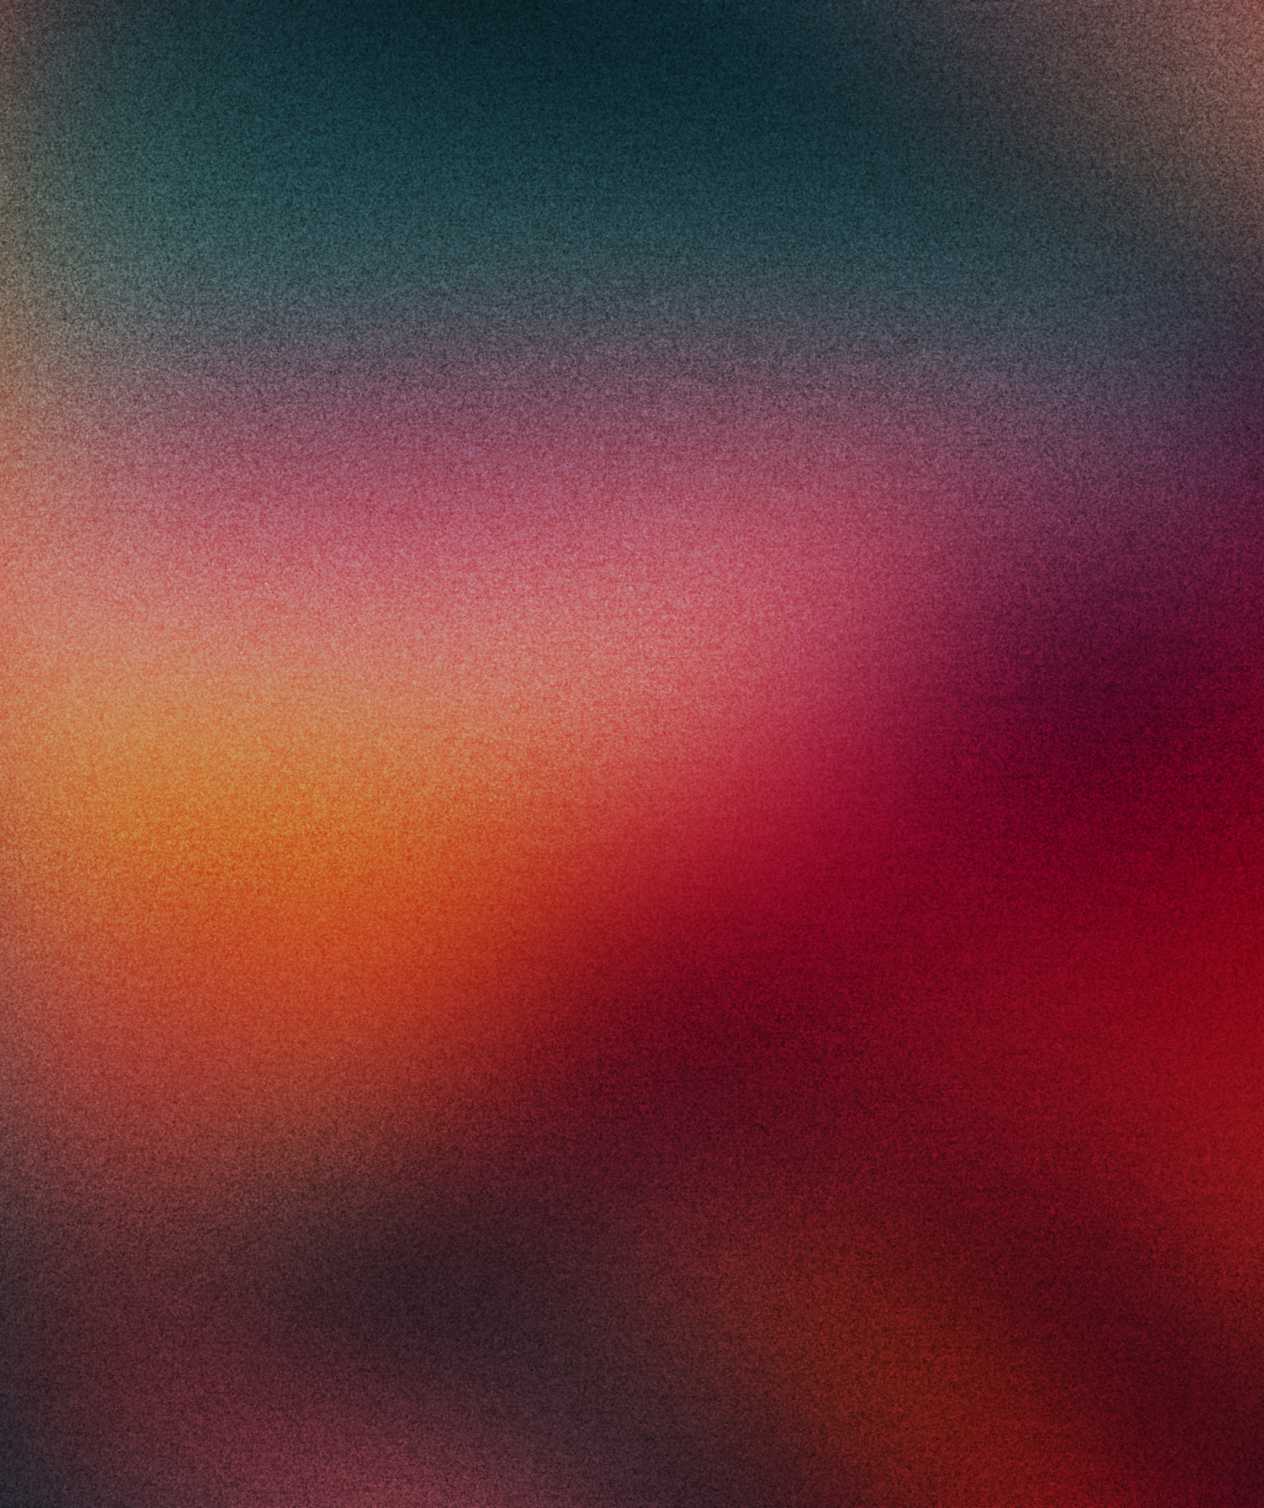 An abstract image featuring a gradient of colors from dark green at the top to red, orange, and pink in the middle, blending into darker shades towards the bottom.